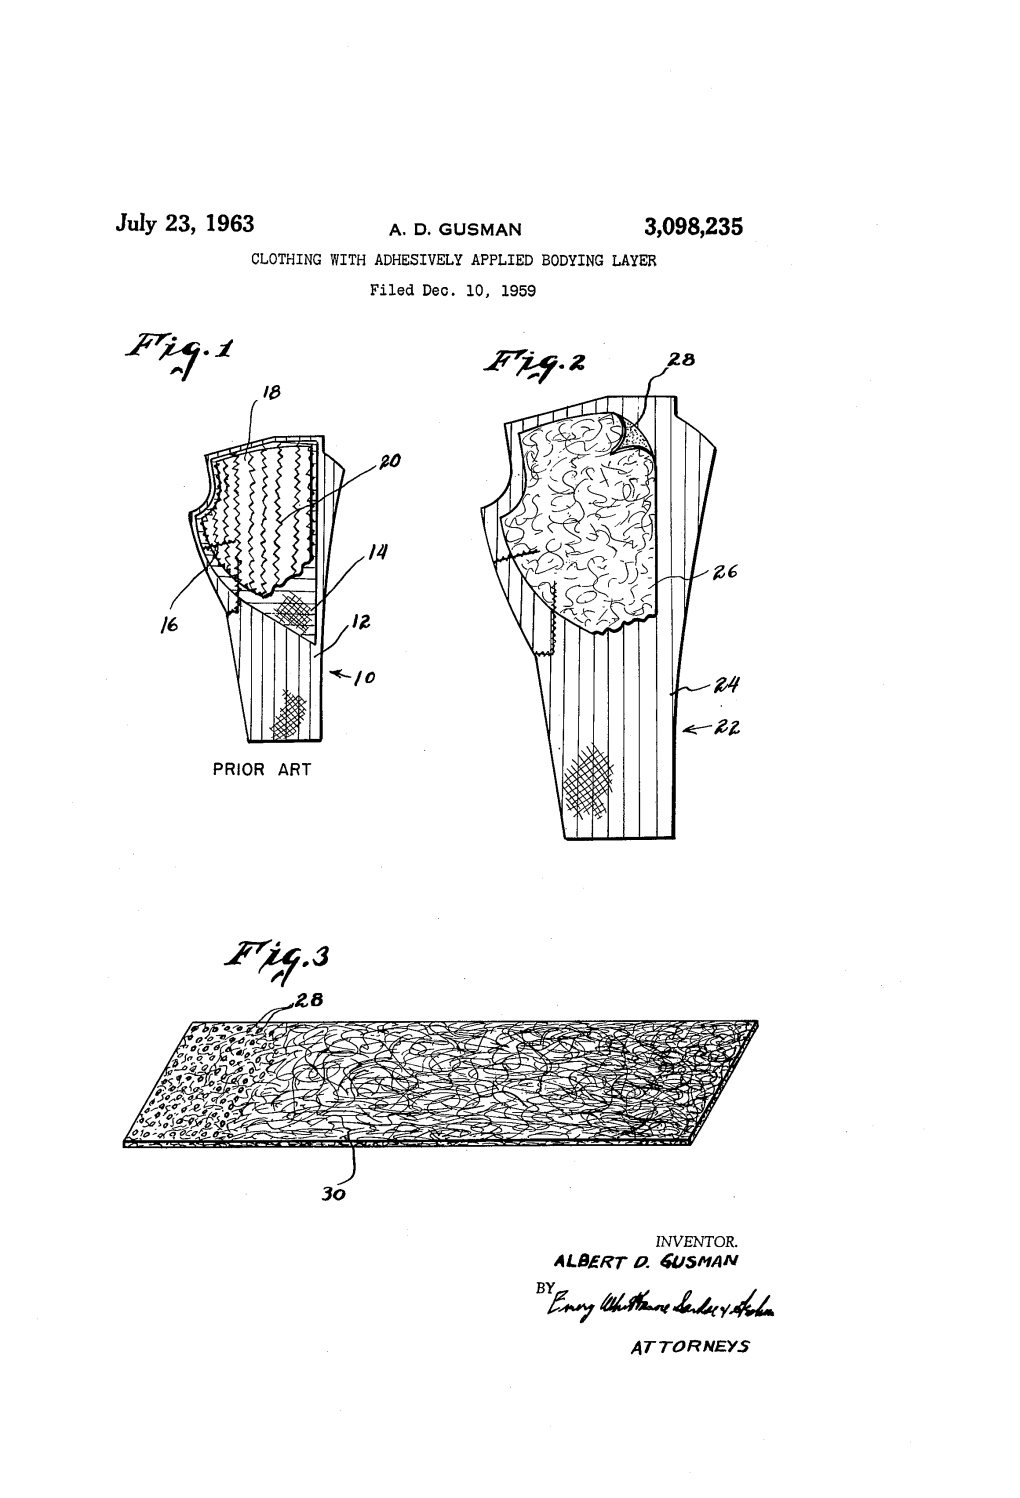 "Ey 4. 4.4% A77 Orneys 3,098,235 United States Patent Office Patented July 23, 1963 1